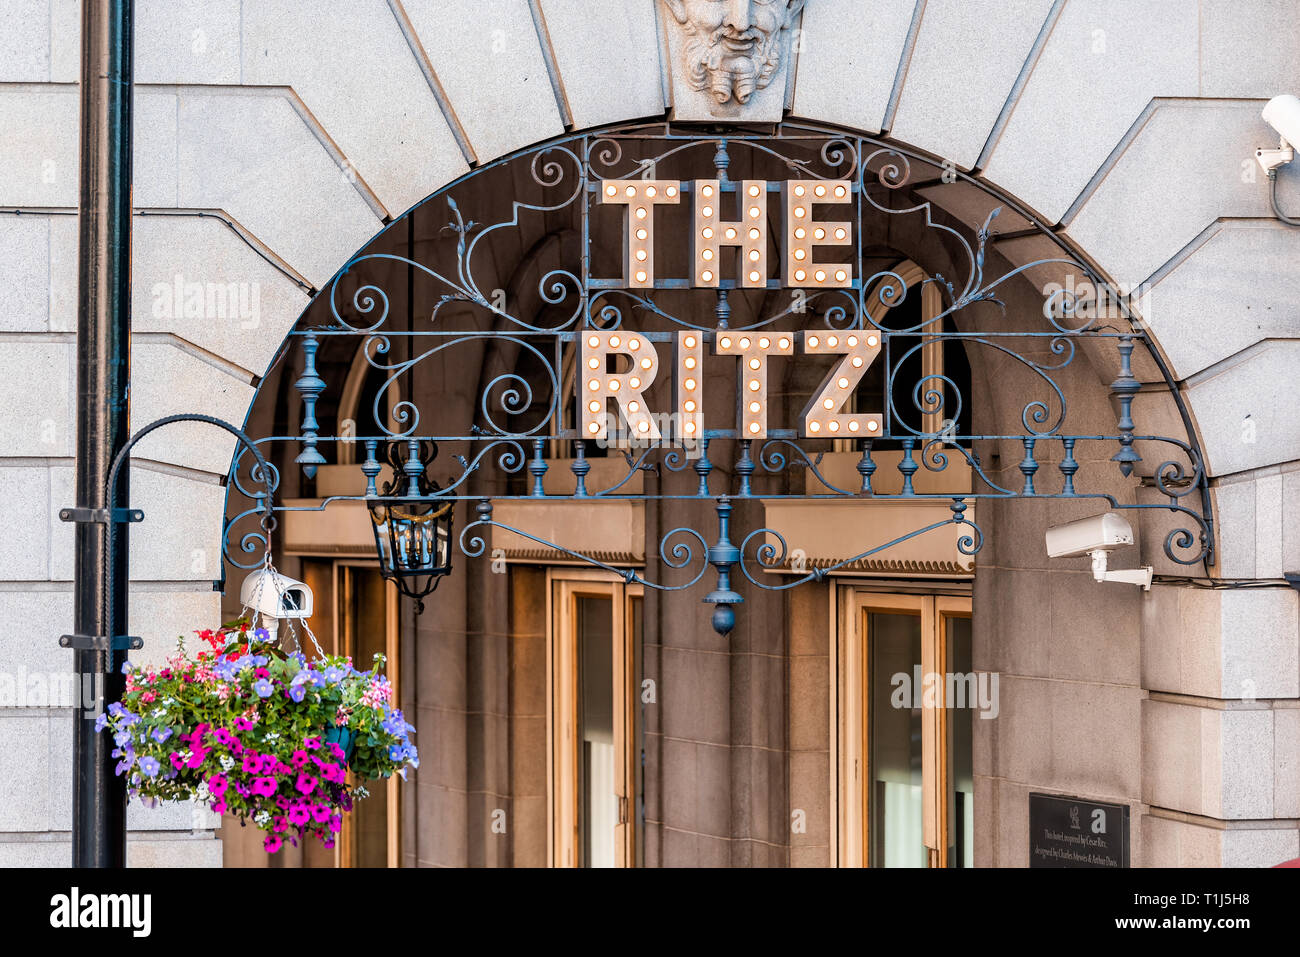 London, UK - June 22, 2018: Piccadilly Circus Regent street with closeup of sign entrance to the Ritz hotel with hanging basket flower decoration in s Stock Photo